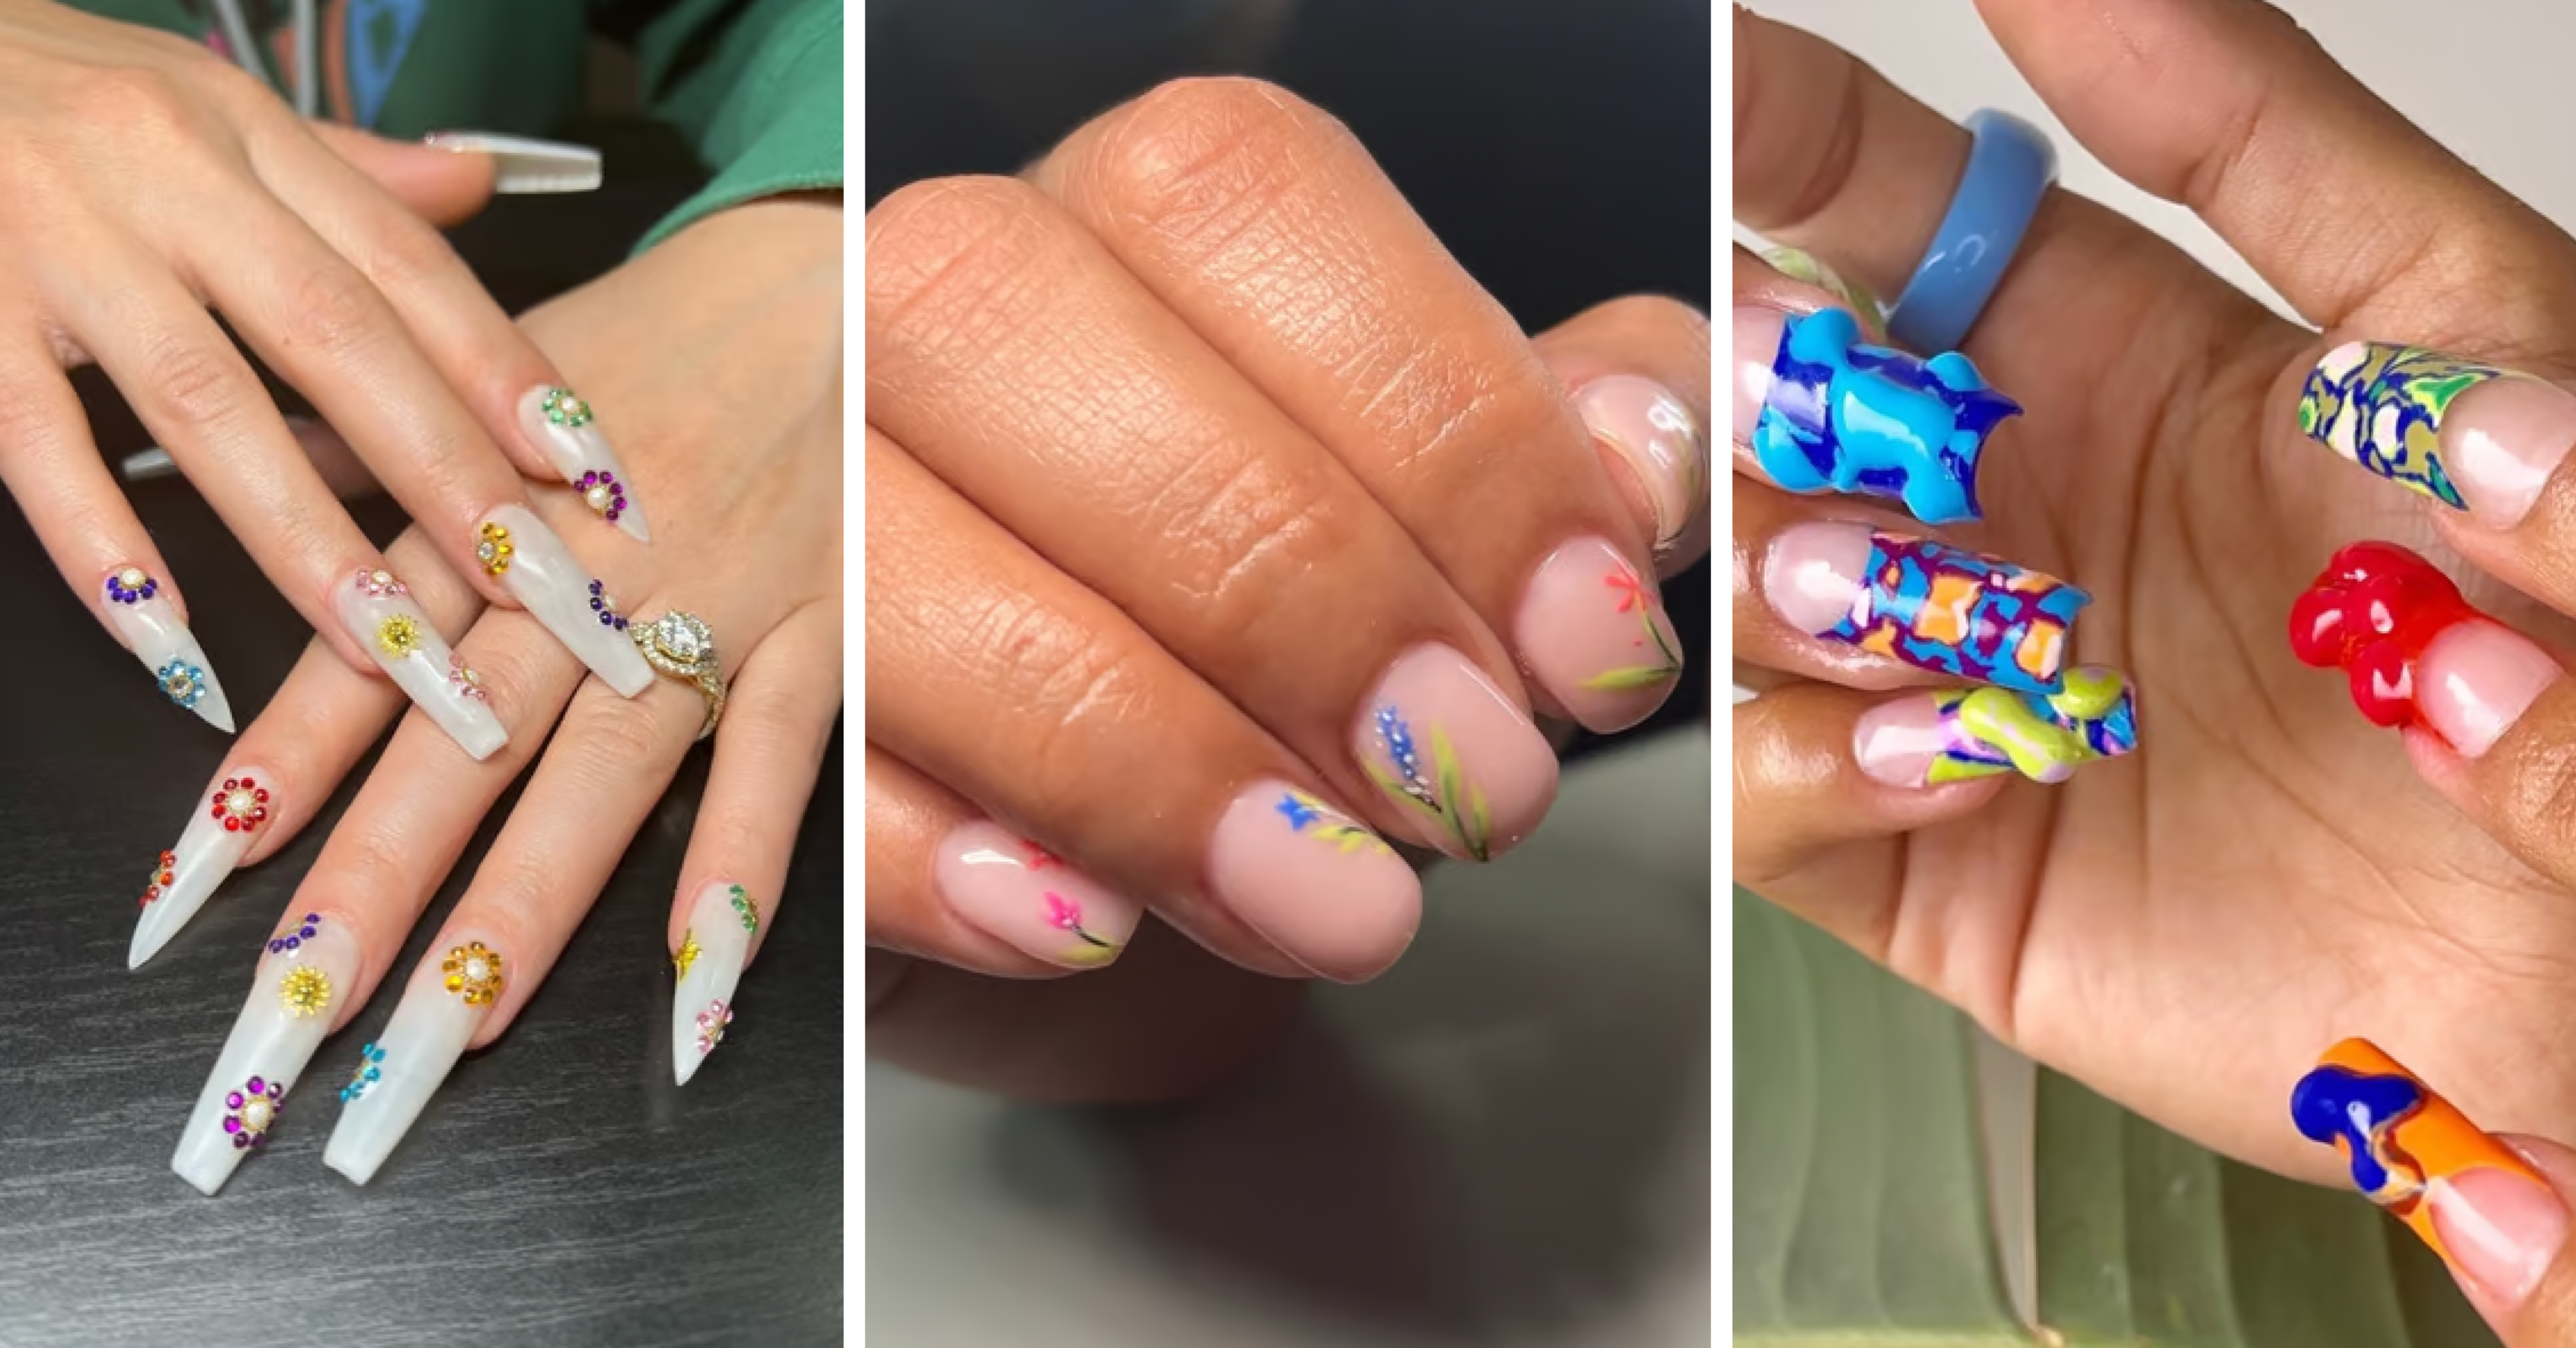 7 Colorful Spring Nail Designs For Your Next Manicure